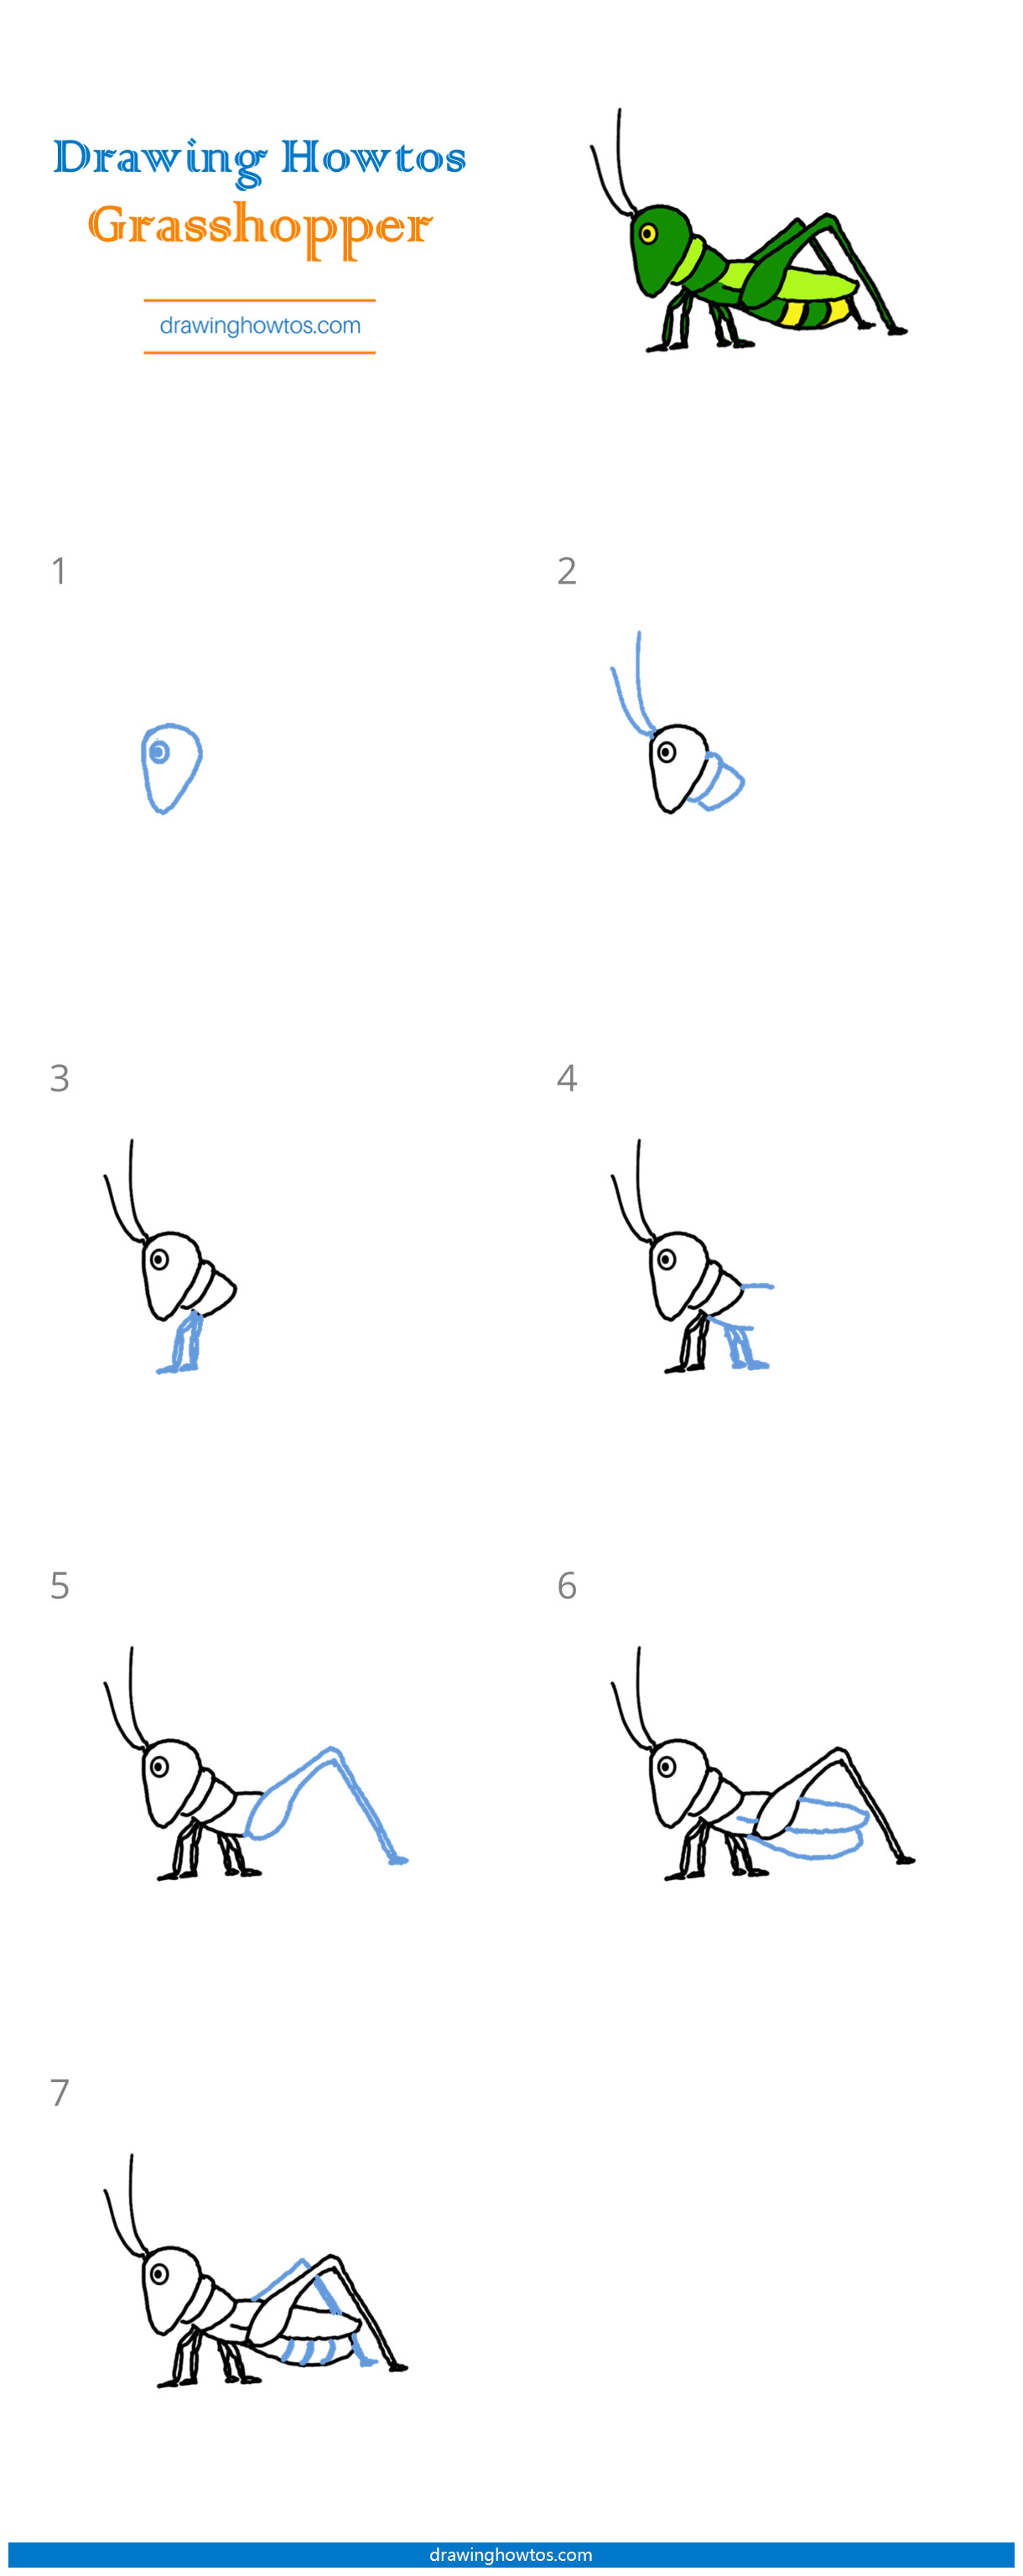 How to Draw a Grasshopper Step by Step